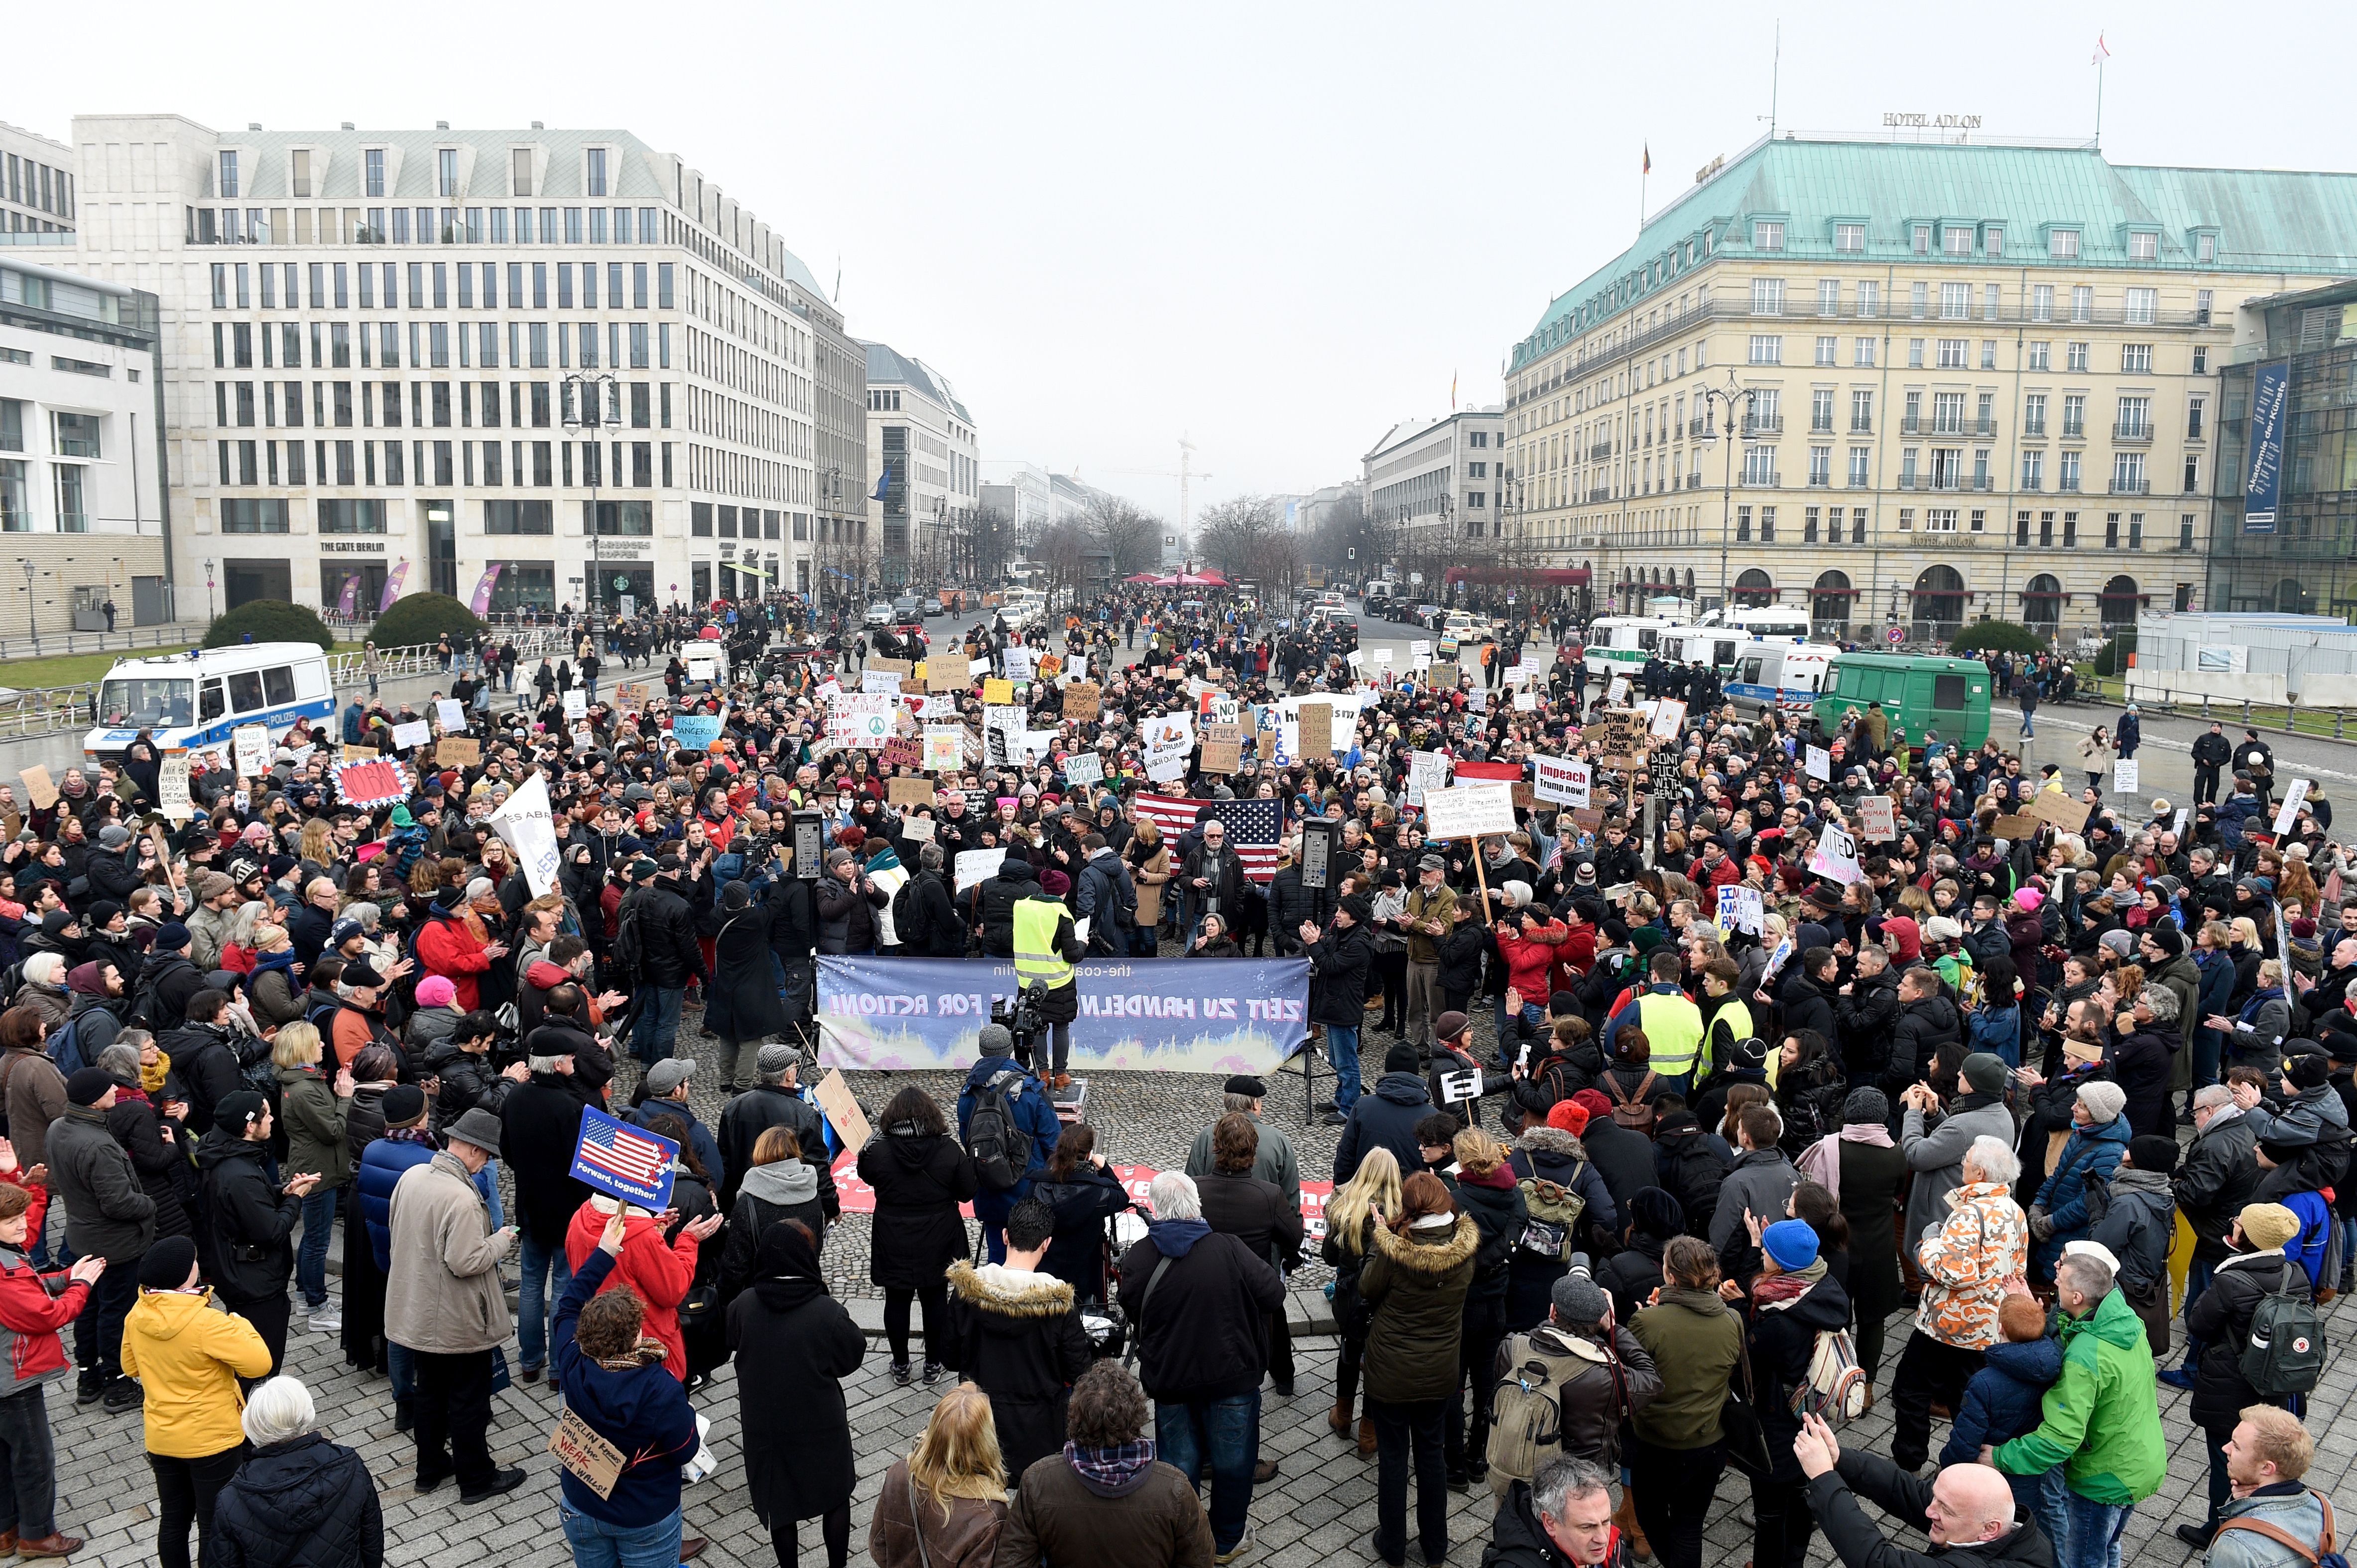 People protest against the travel ban imposed by US President Donald Trump, on February 4, 2017, in front of Berlin's Brandenburg Gate and the US embassy. (RAINER JENSEN/AFP/Getty Images)